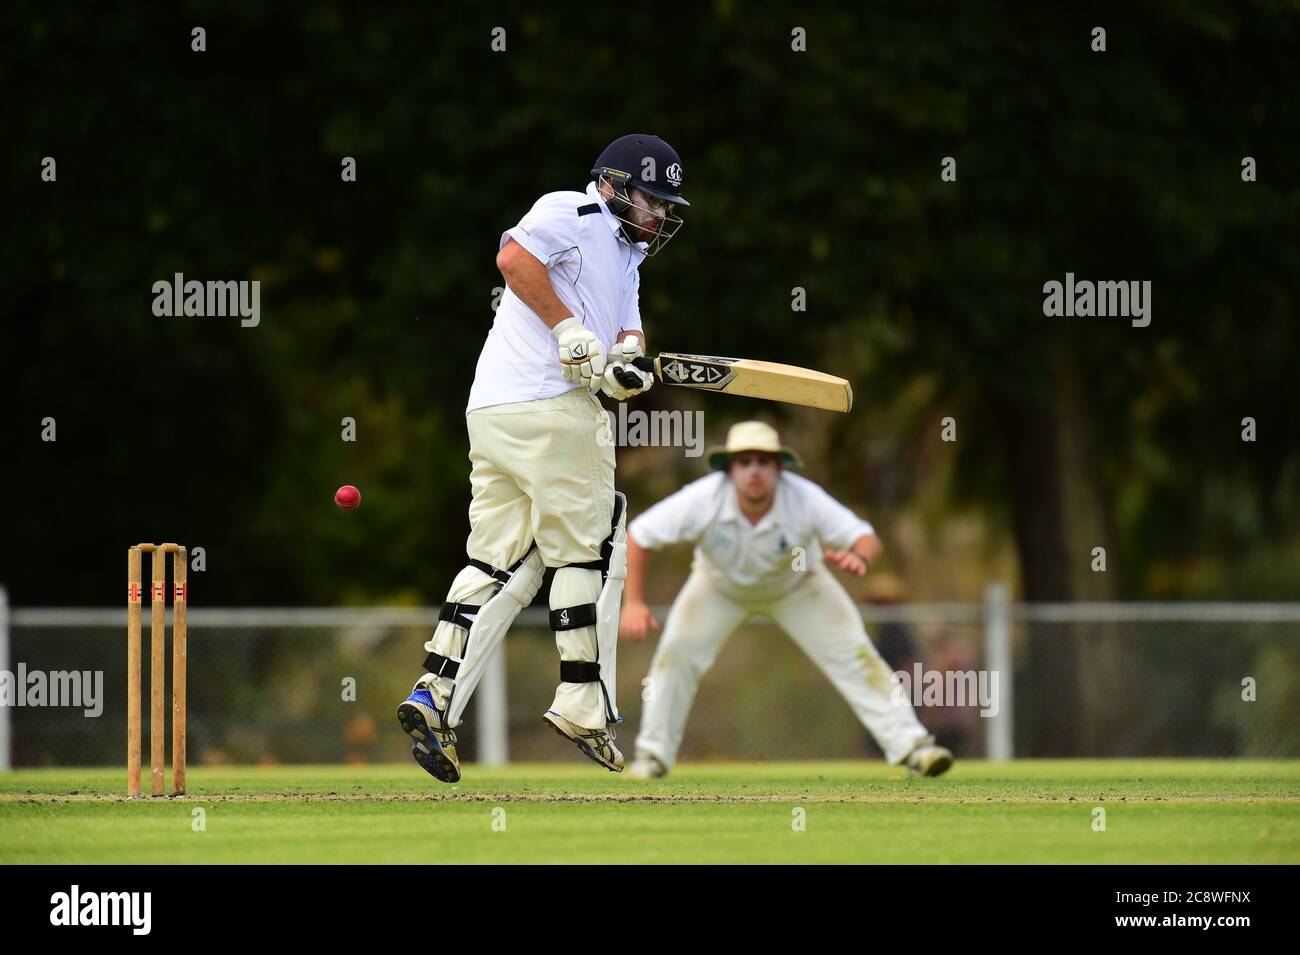 A cricketer flicks the ball behind him whilst a fielder watches on during a cricket match in Victoria, Australia Stock Photo